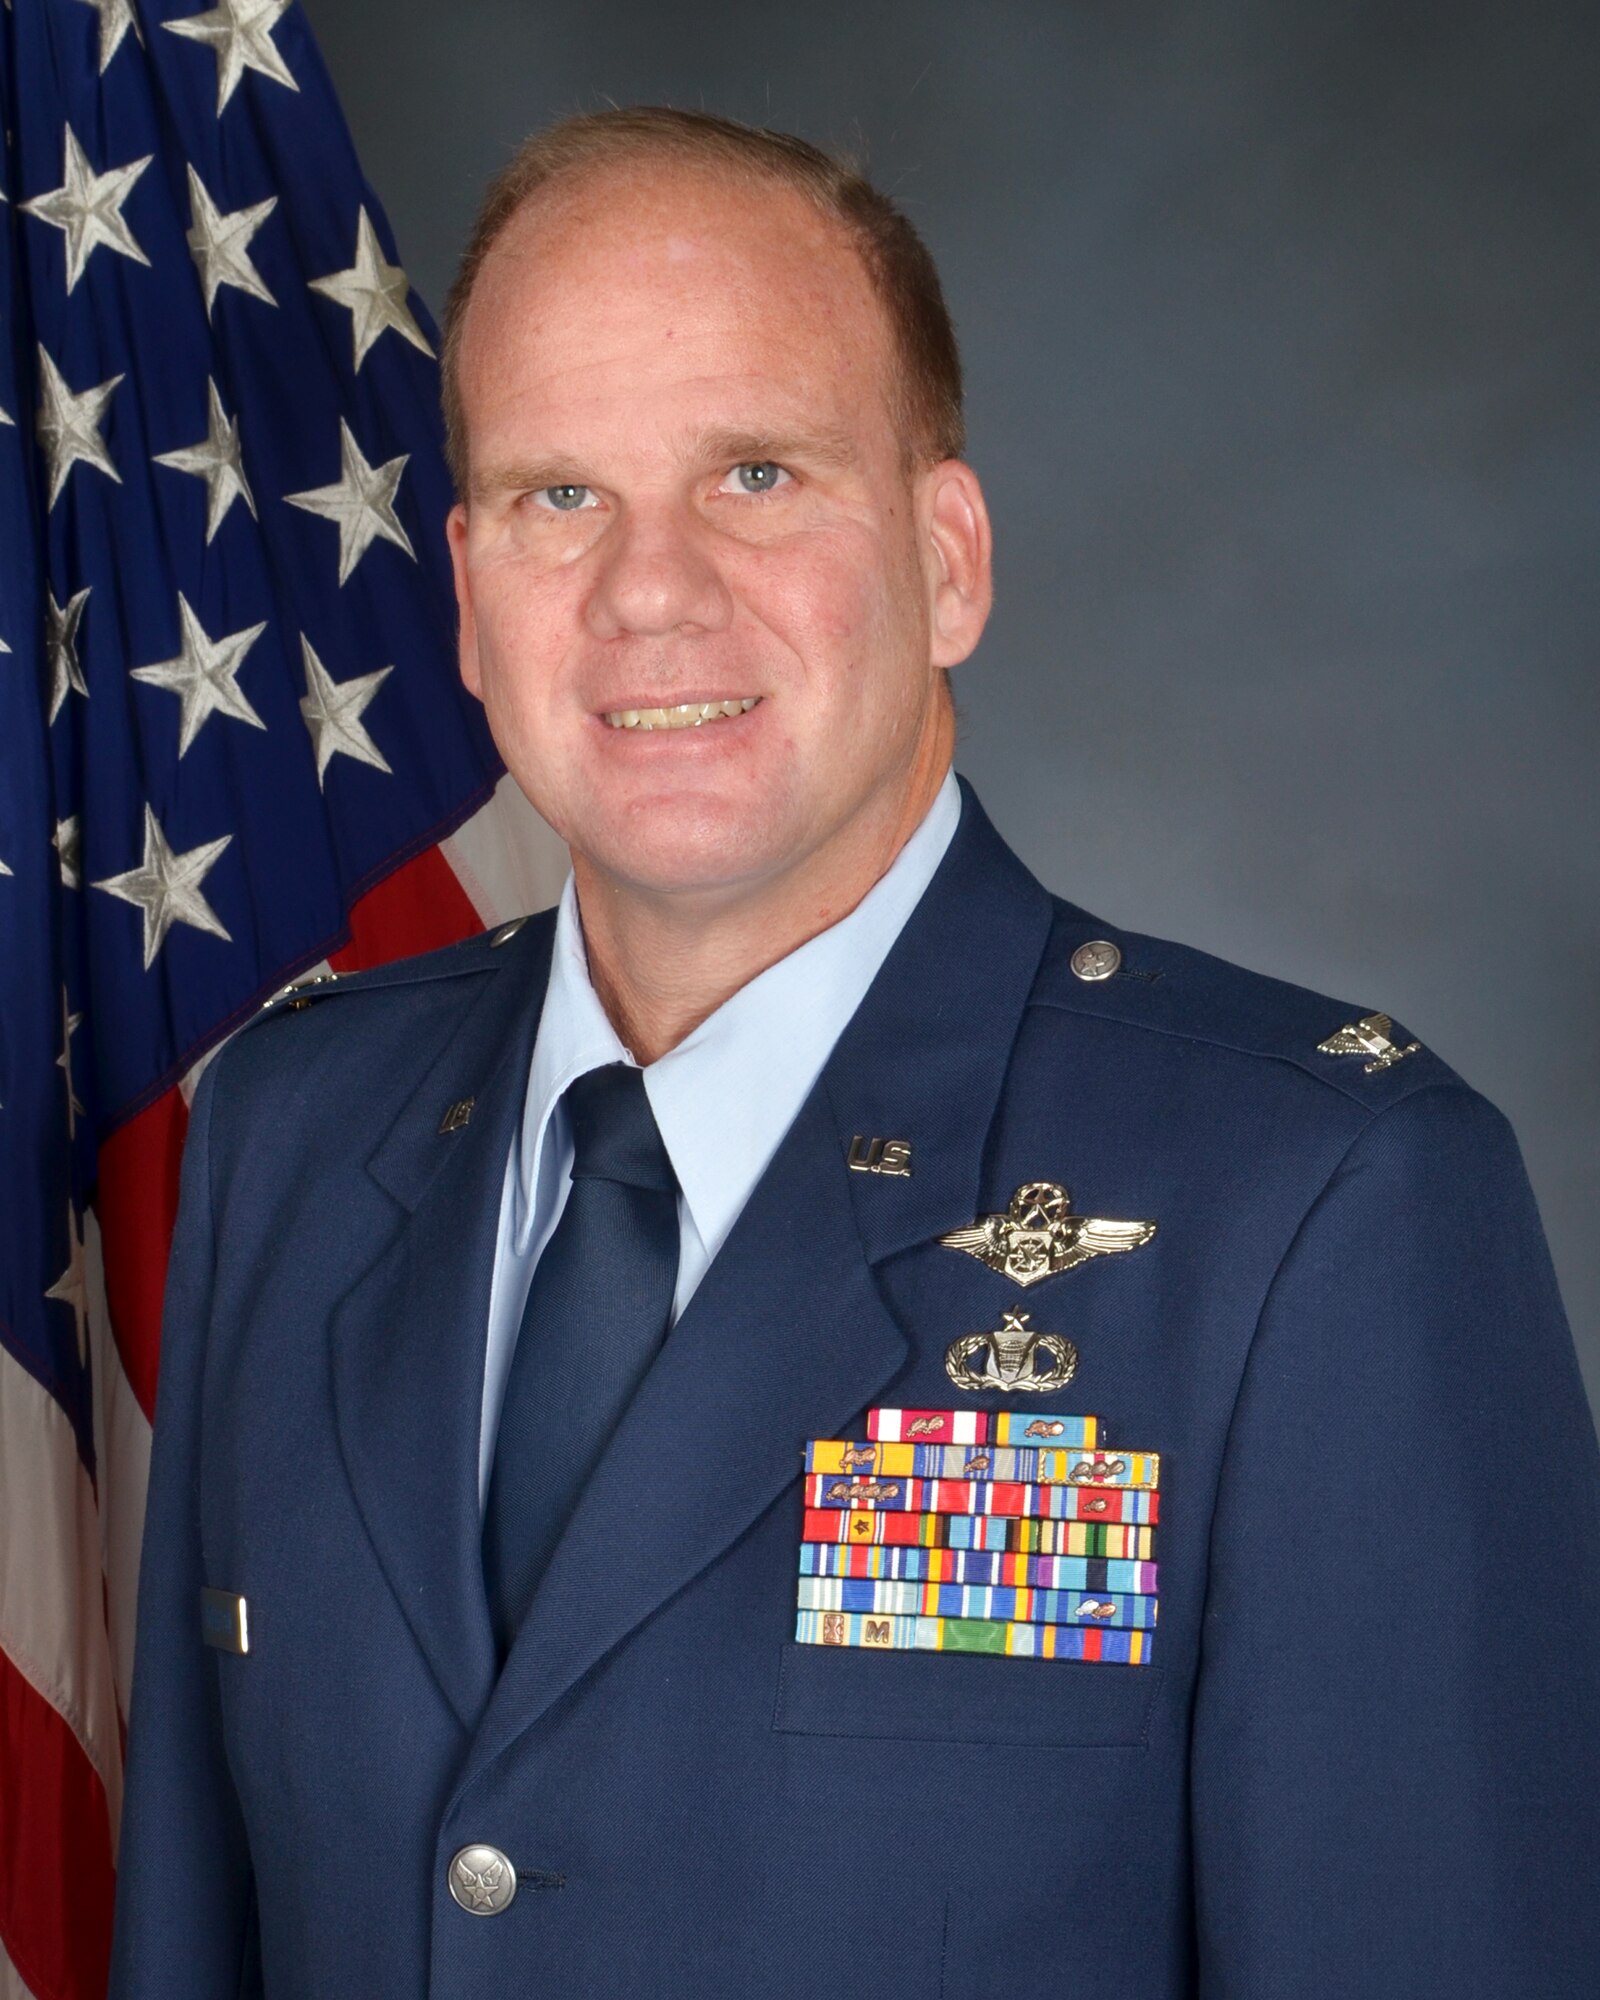 Col. David W. Robertson is the commander of the 513th Air Control Group at Tinker Air Force Base, Oklahoma. He has more than 20 years of experience in command and control, including joint and multi-national operations. Robertson is a Master Air Battle Manager with over 3,500 flight hours in the E-3 Sentry. (U.S. Air Force photo/Senior Airman Mark Hybers)